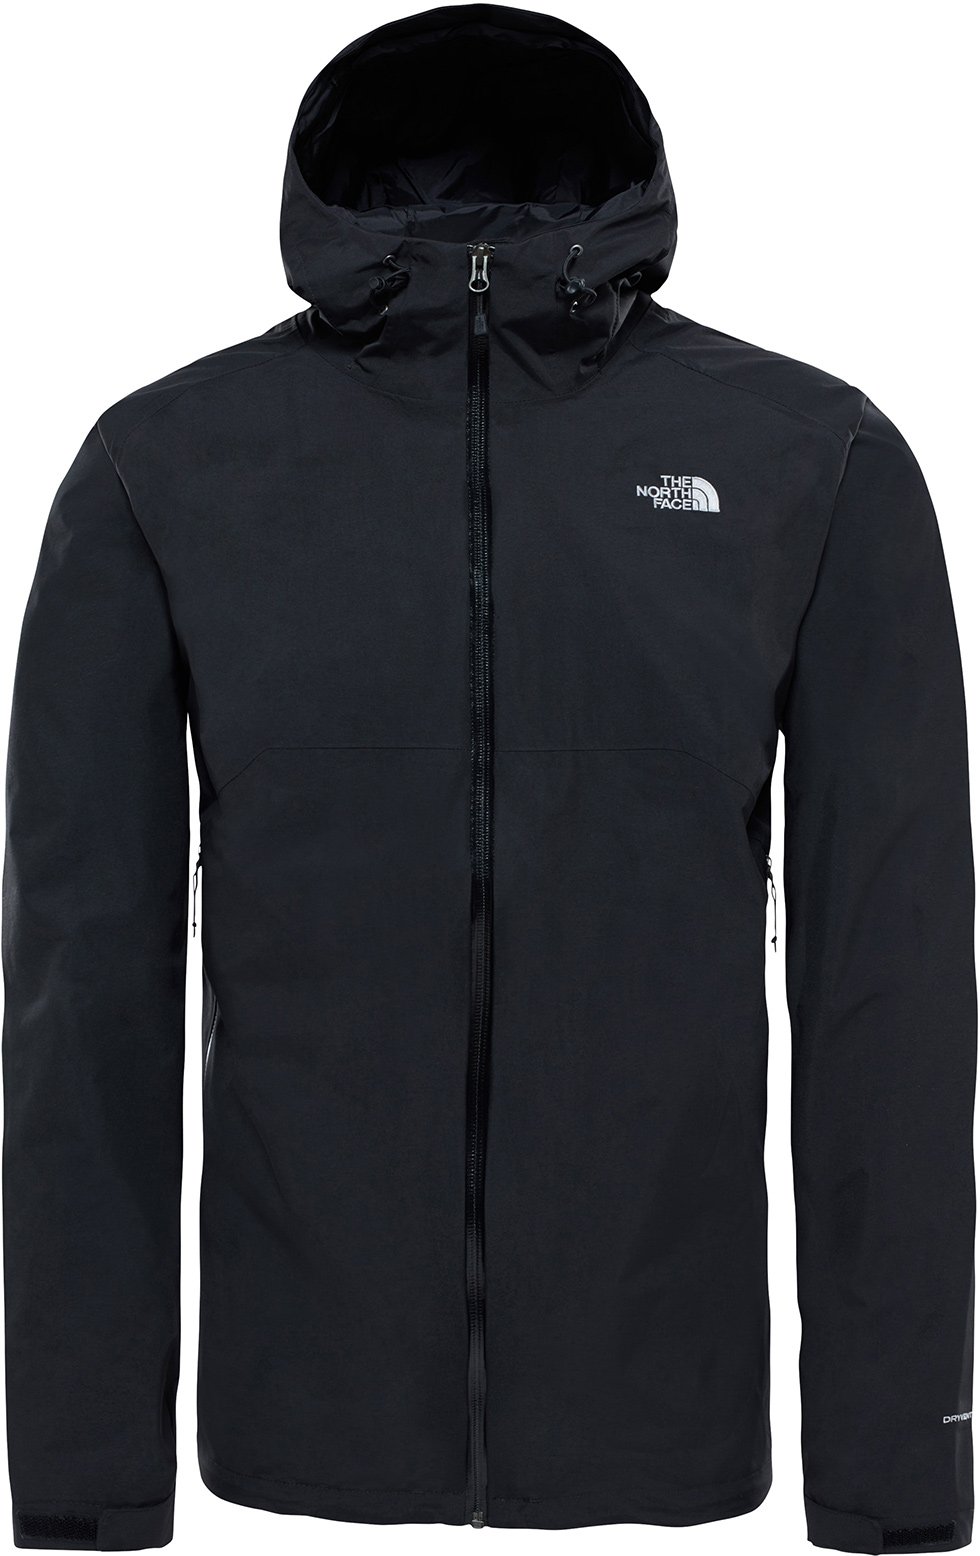 The North Face Men's Stratos Hooded Jacket XL